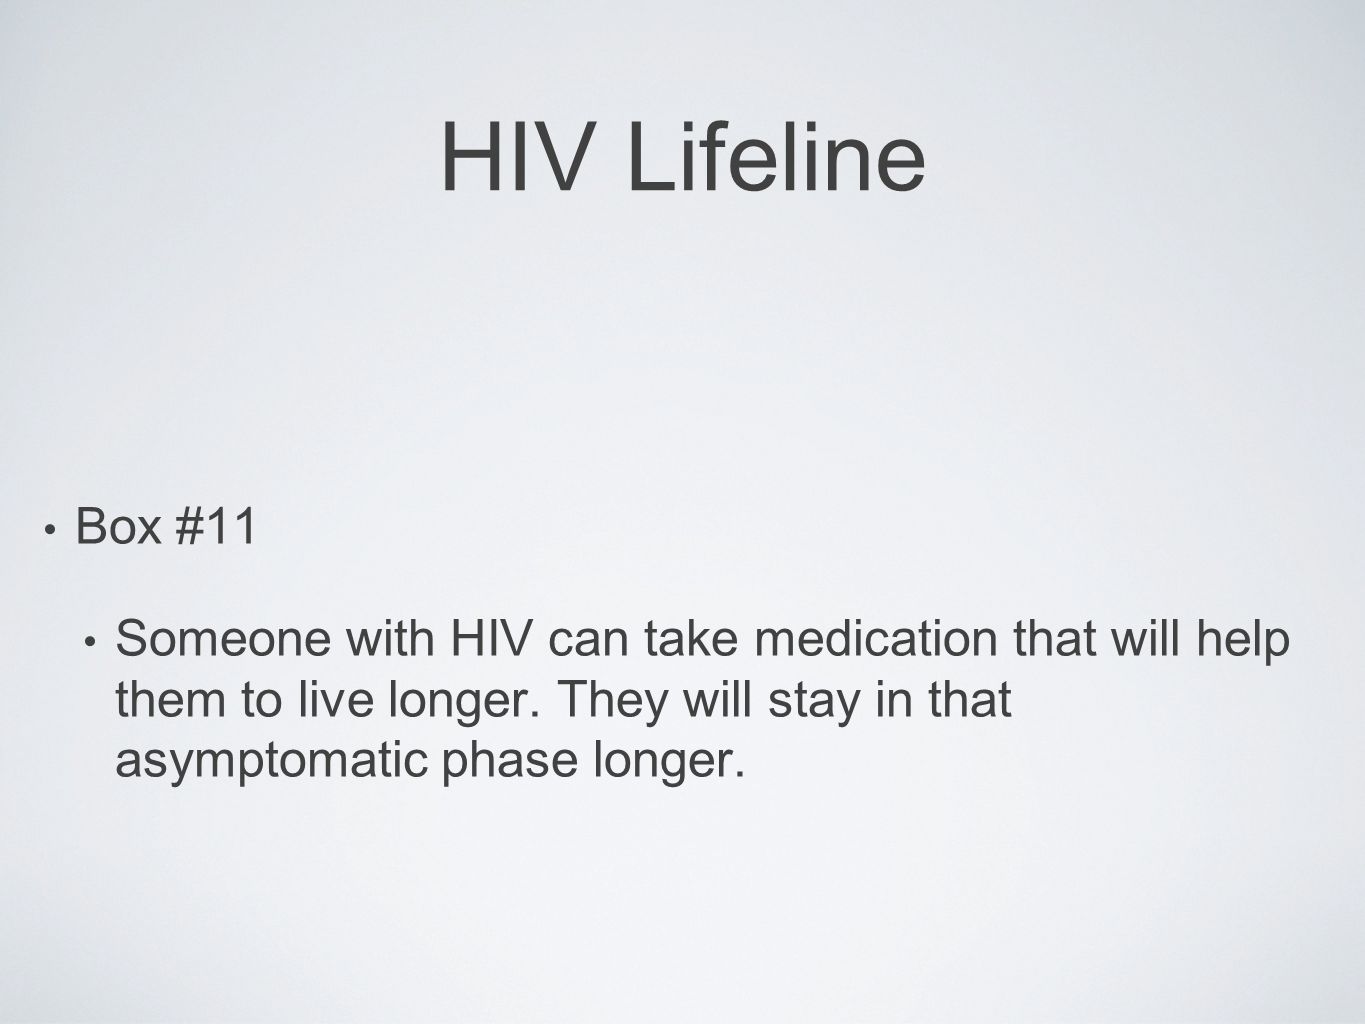 HIV Lifeline Box #11. Someone with HIV can take medication that will help them to live longer.